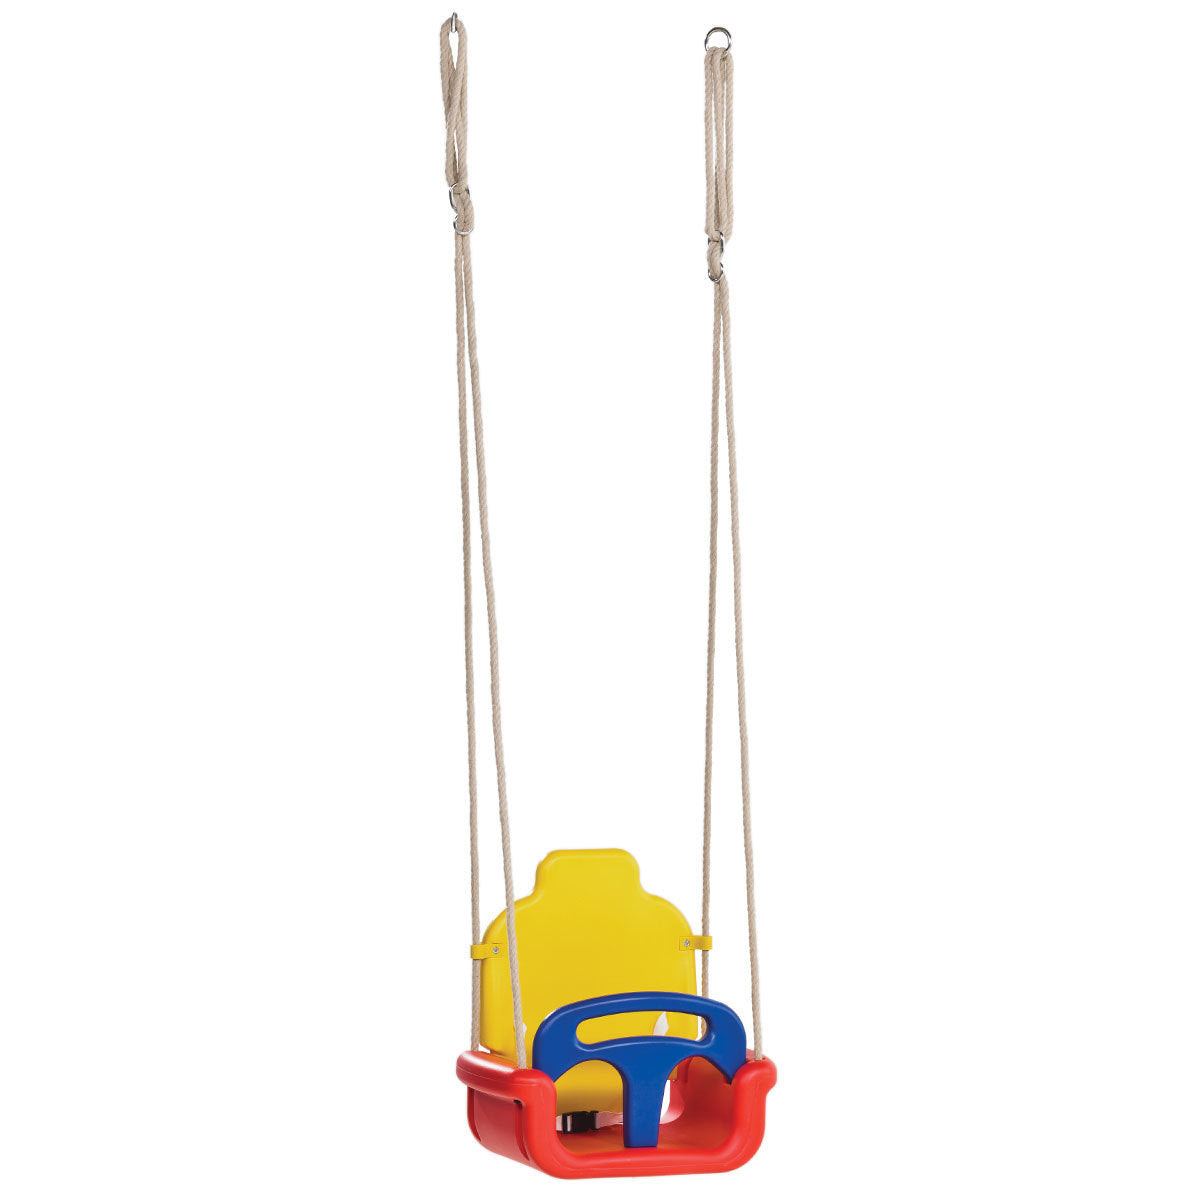 Baby Seat Growing Type Swing with Adjustable Ropes